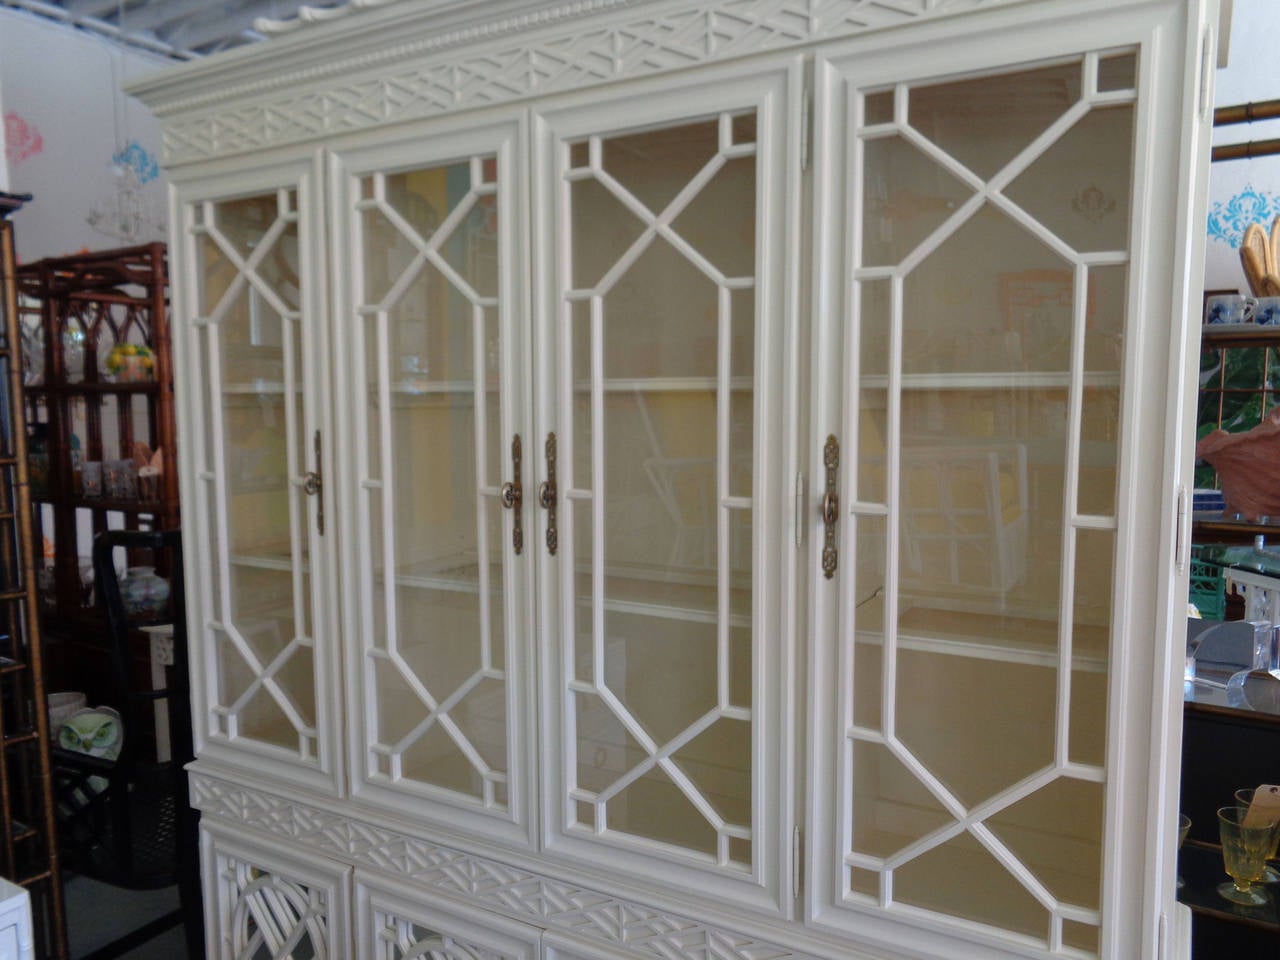 Fretwork Chippendale Pagoda Cabinet in good as found VINTAGE condition. There are minor scuffs and scrapes to the as found finish. 70s Regency